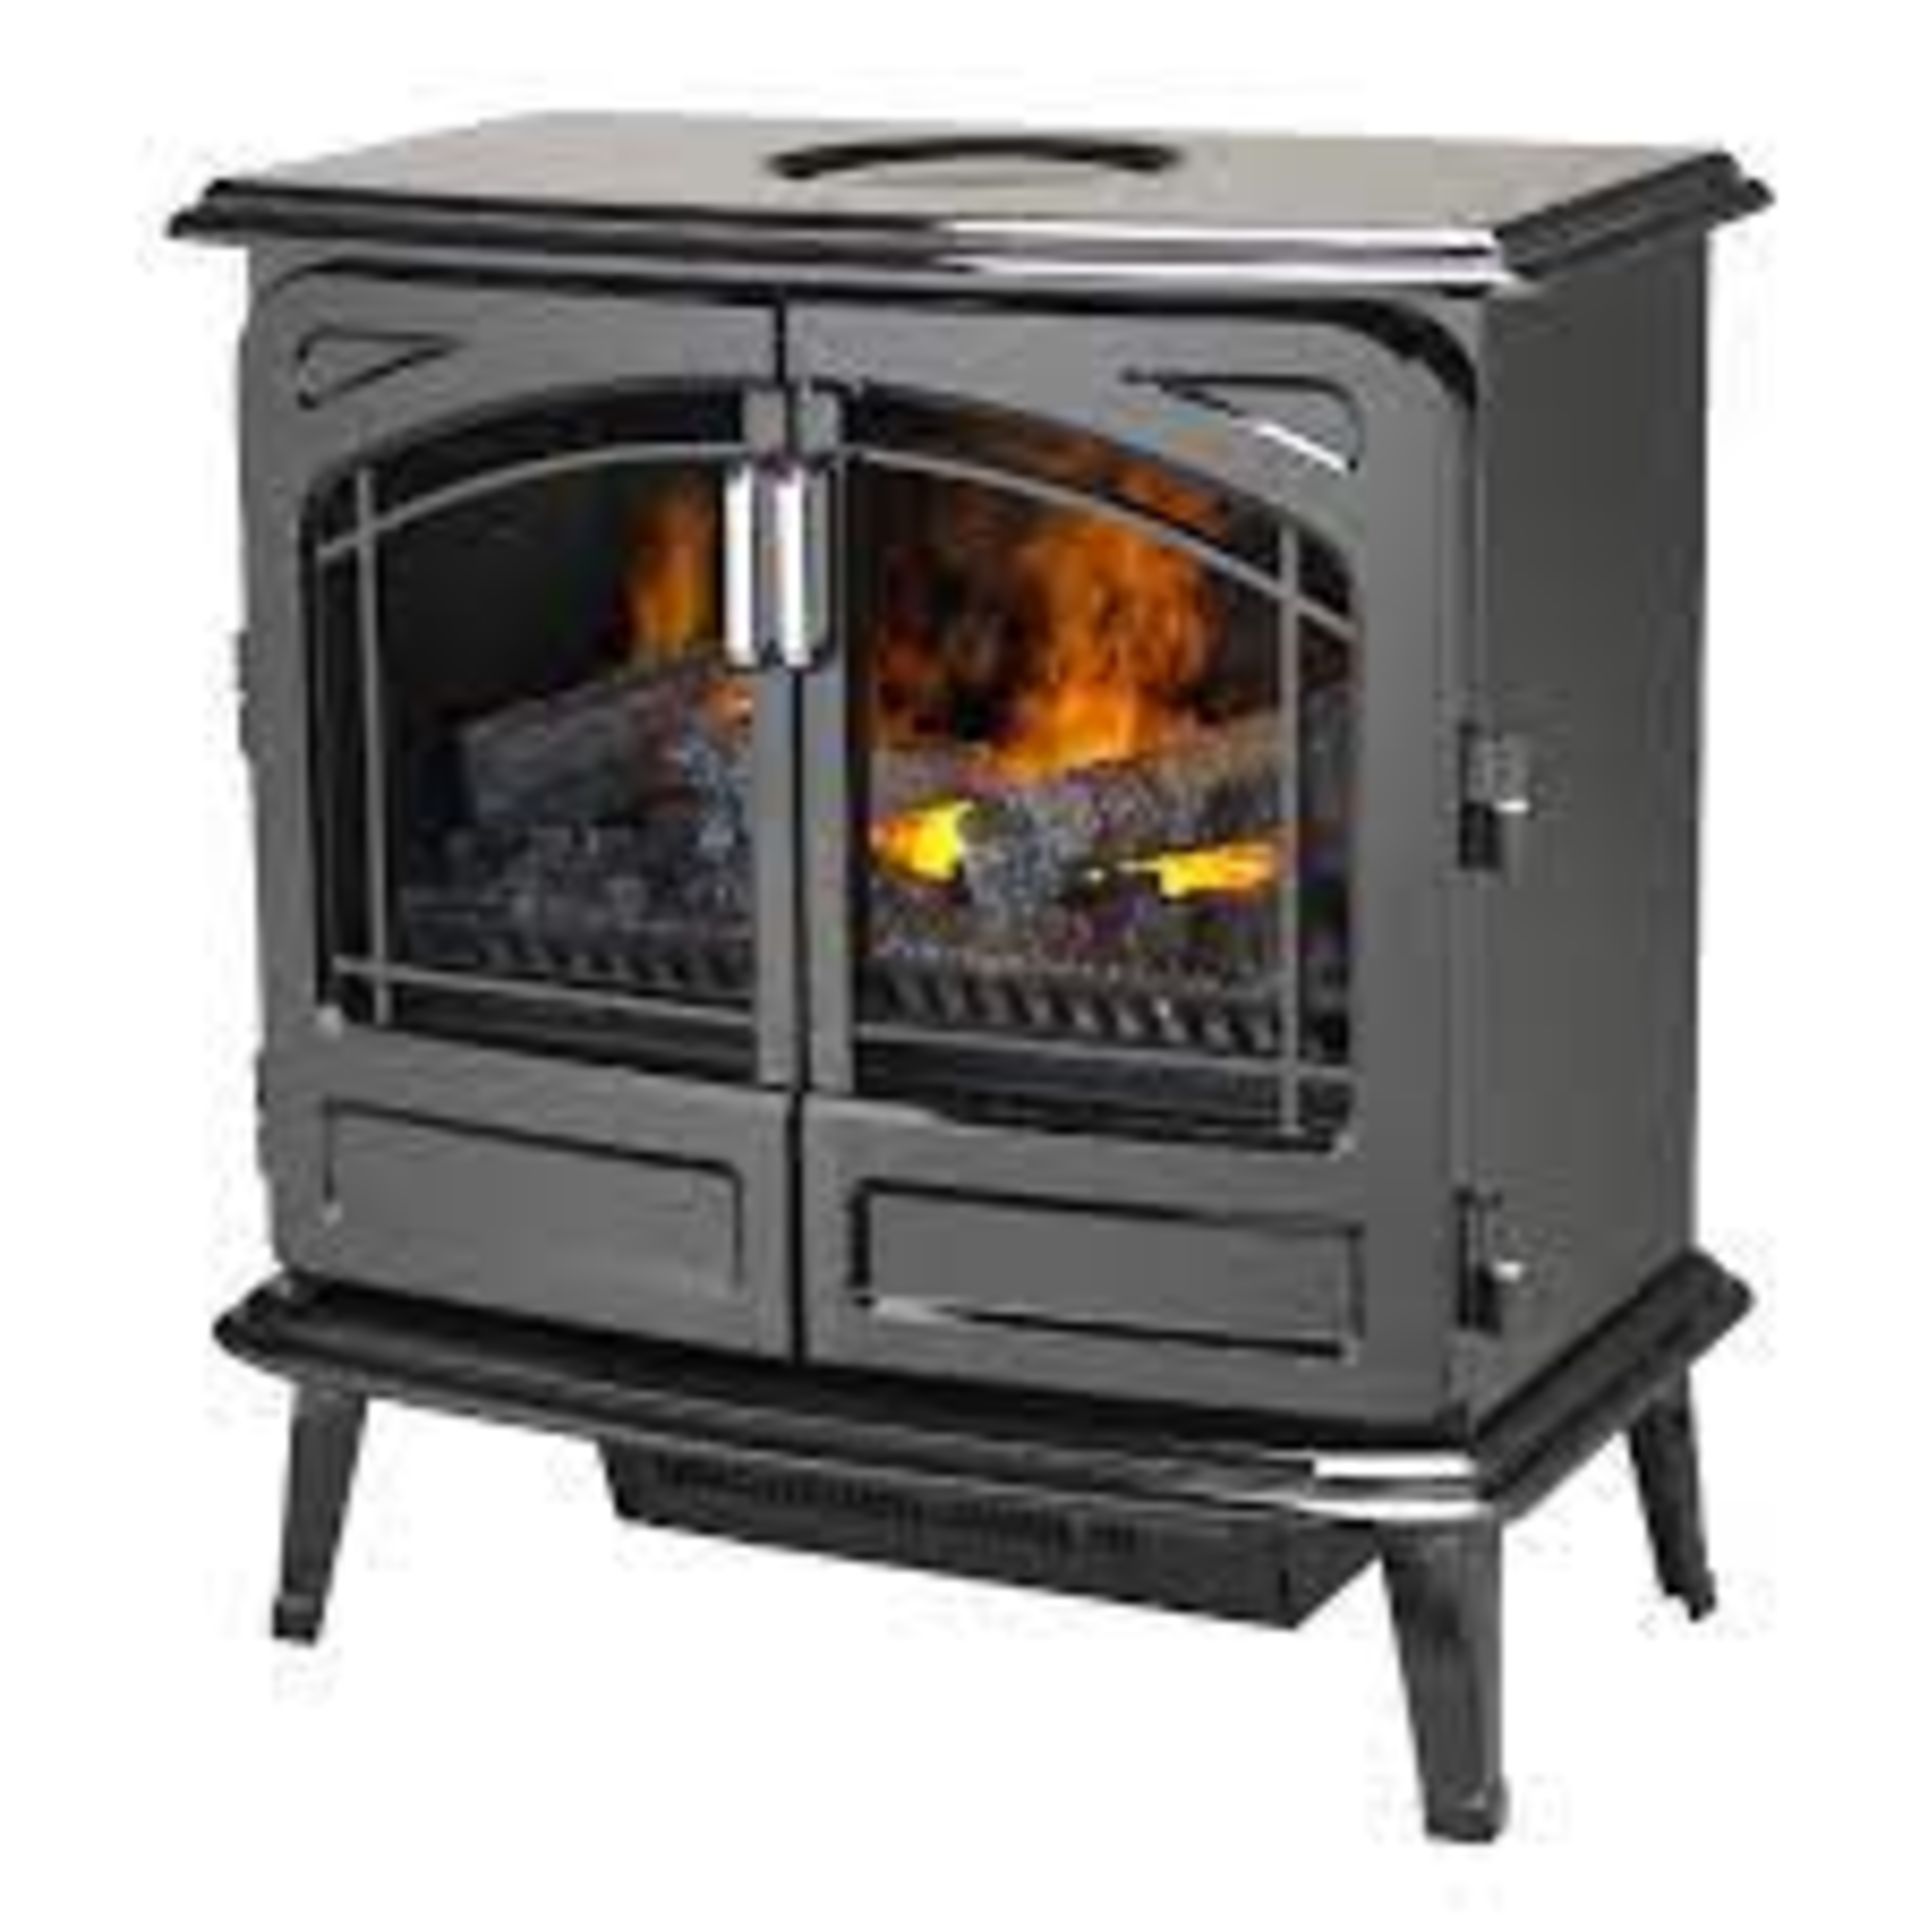 Dimplex Grand Noir Optimyst Electric Stove. - ER48.RRP £720.00. Attractive electric stove in a black